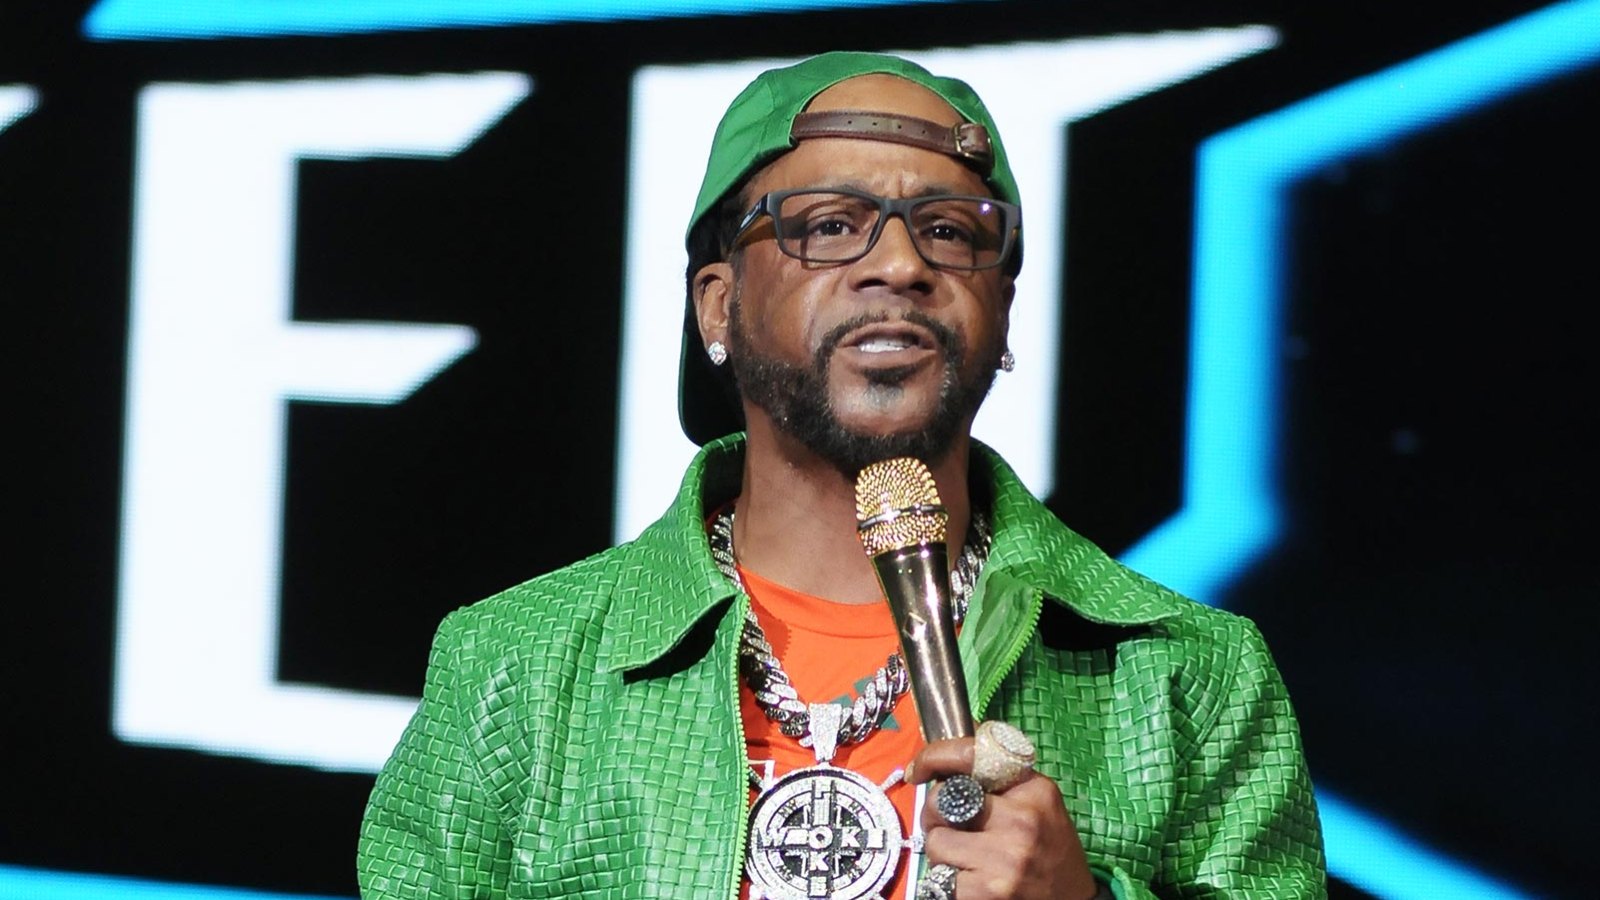 Katt Williams Fought For Friday After Next Rape Scene to Be Cut